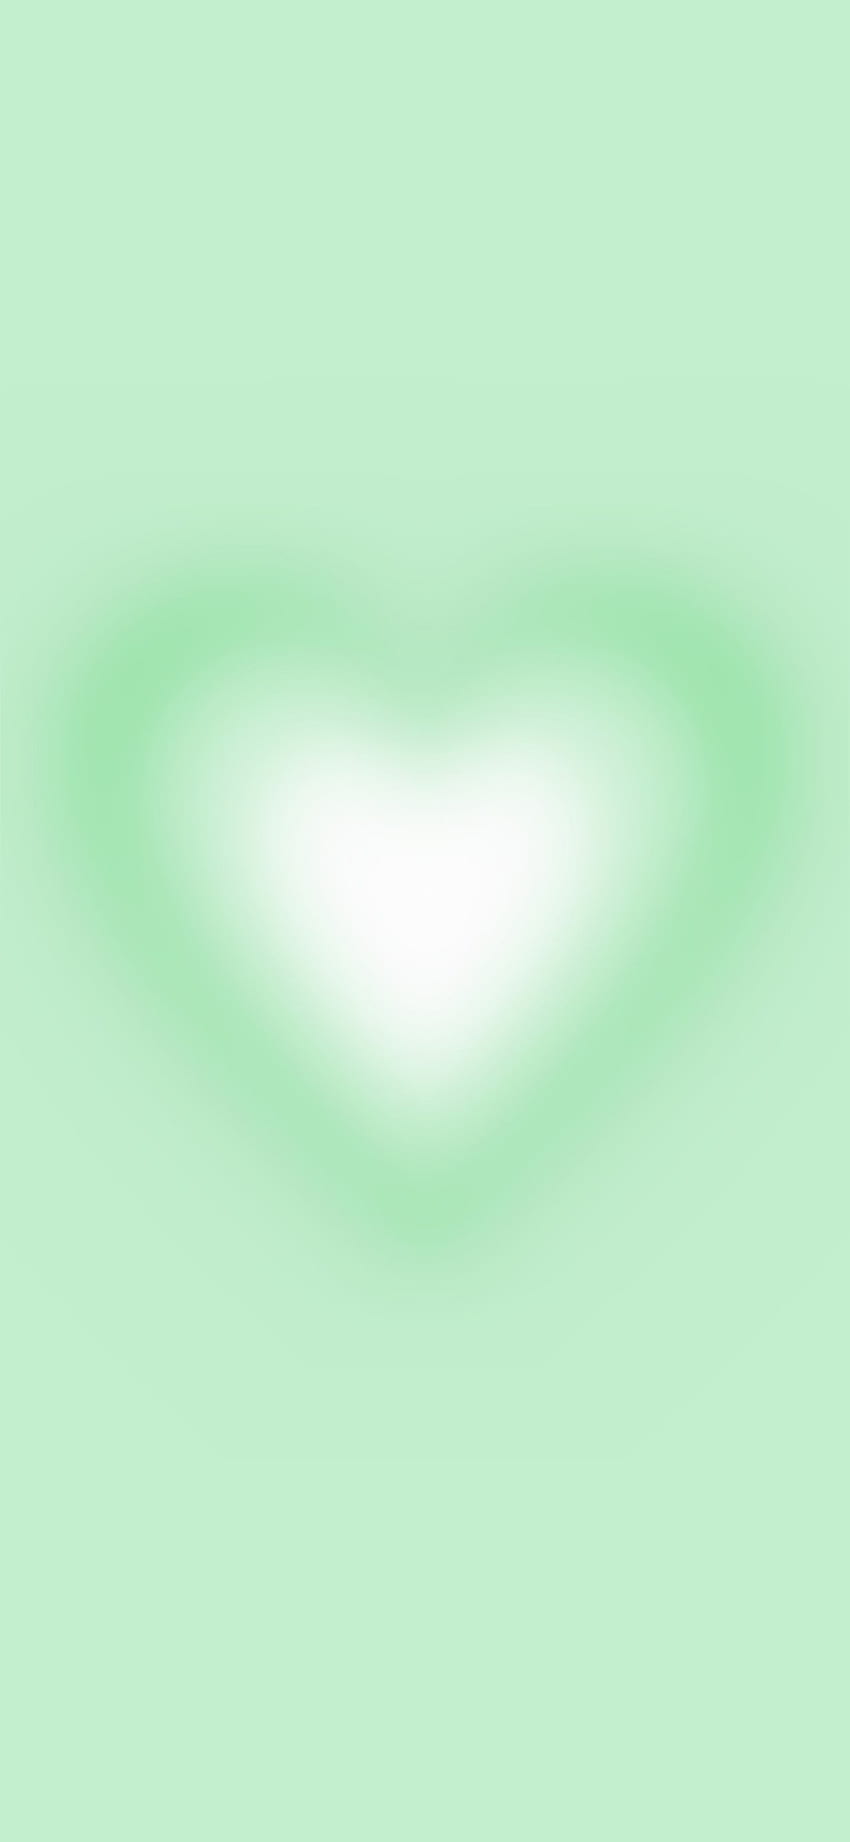 A green and white heart on a green background - Gradient